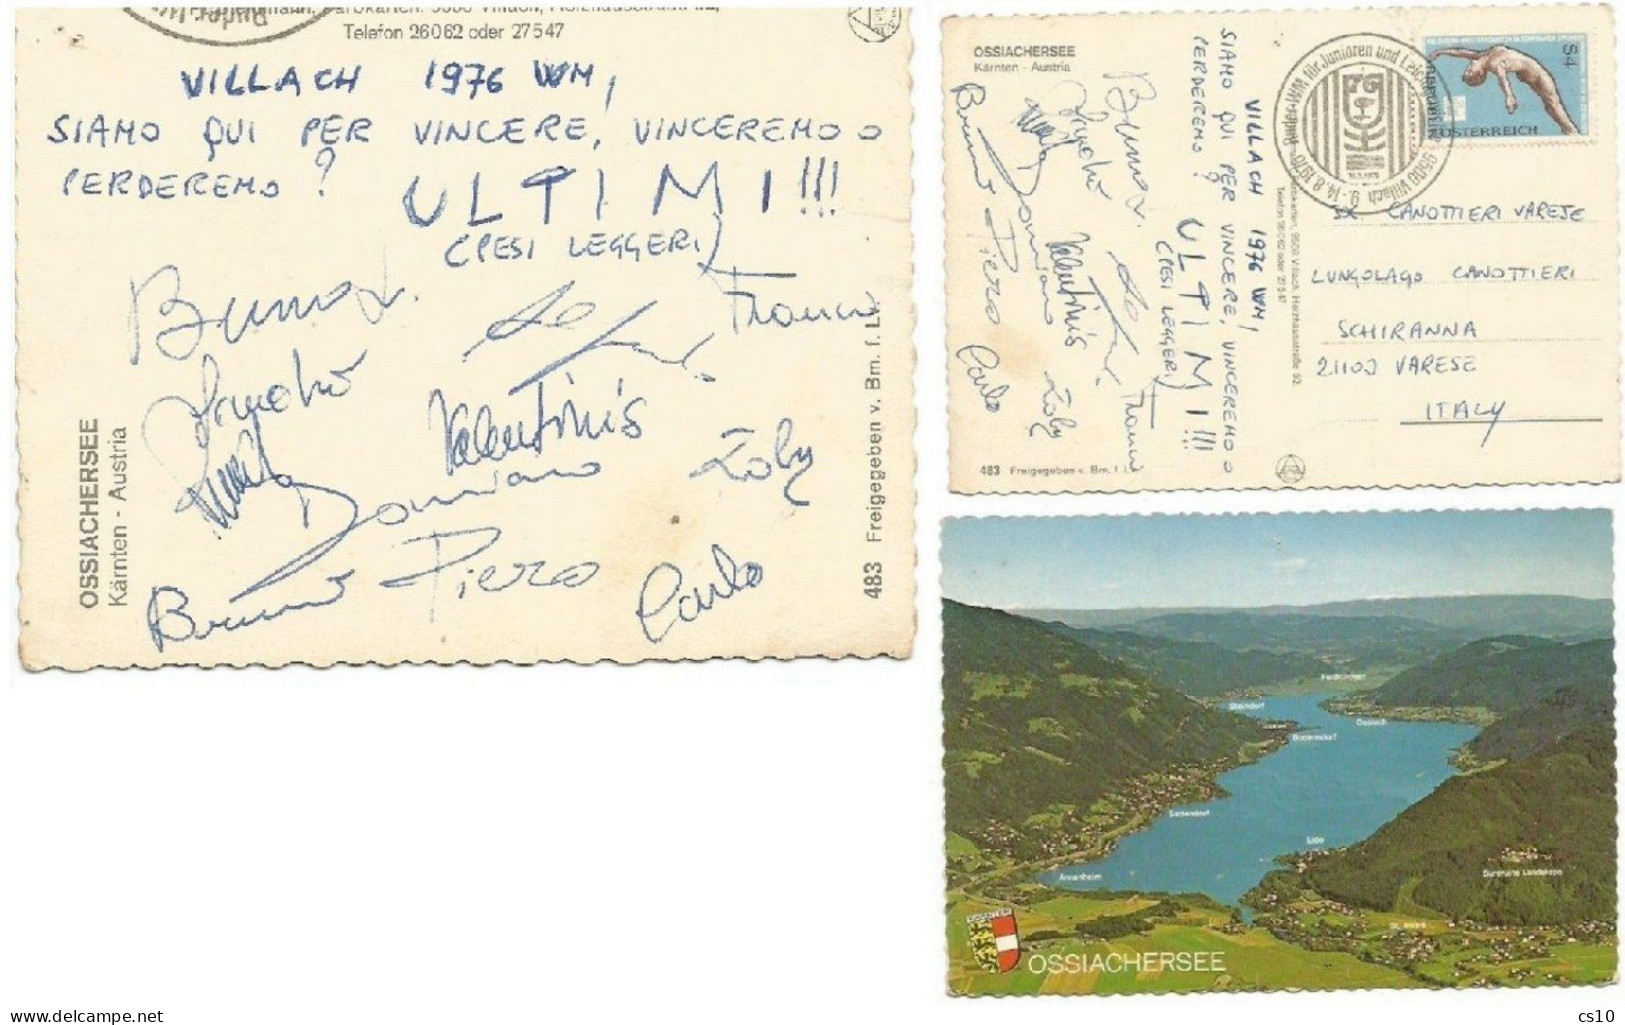 Canottaggio Rowing Pesi Leggeri Euro Cahmpionship 1976 Villach Austria Event Pcard Stamp+cachet By Italy Team 11 Signs - Rowing